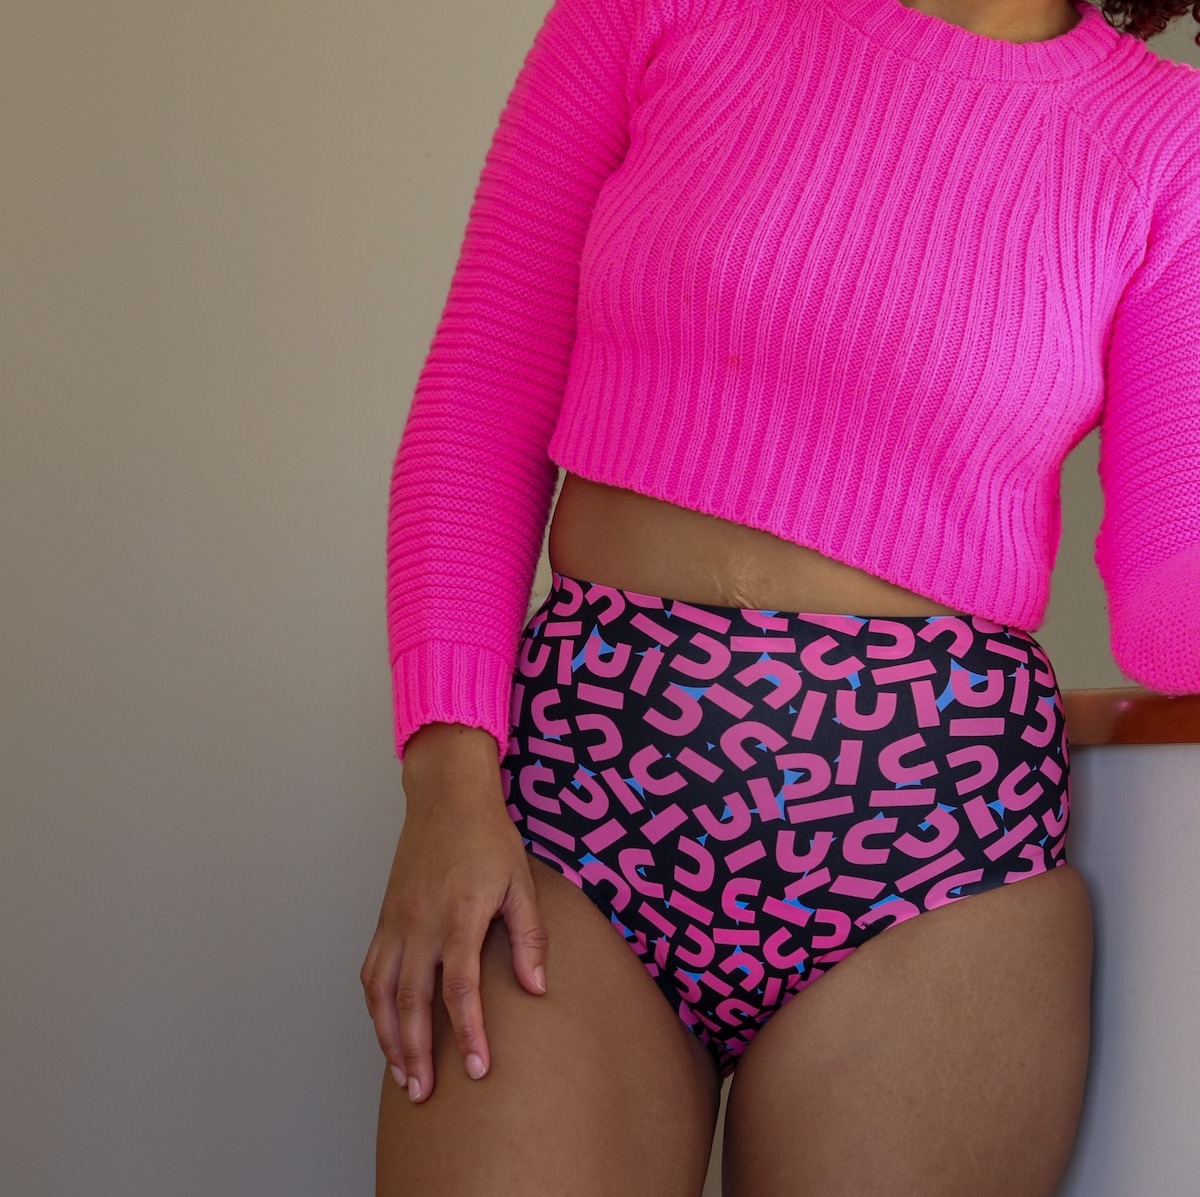 17 Comfy Intimates And Cozy Loungewear You Absolutely Need For Fall